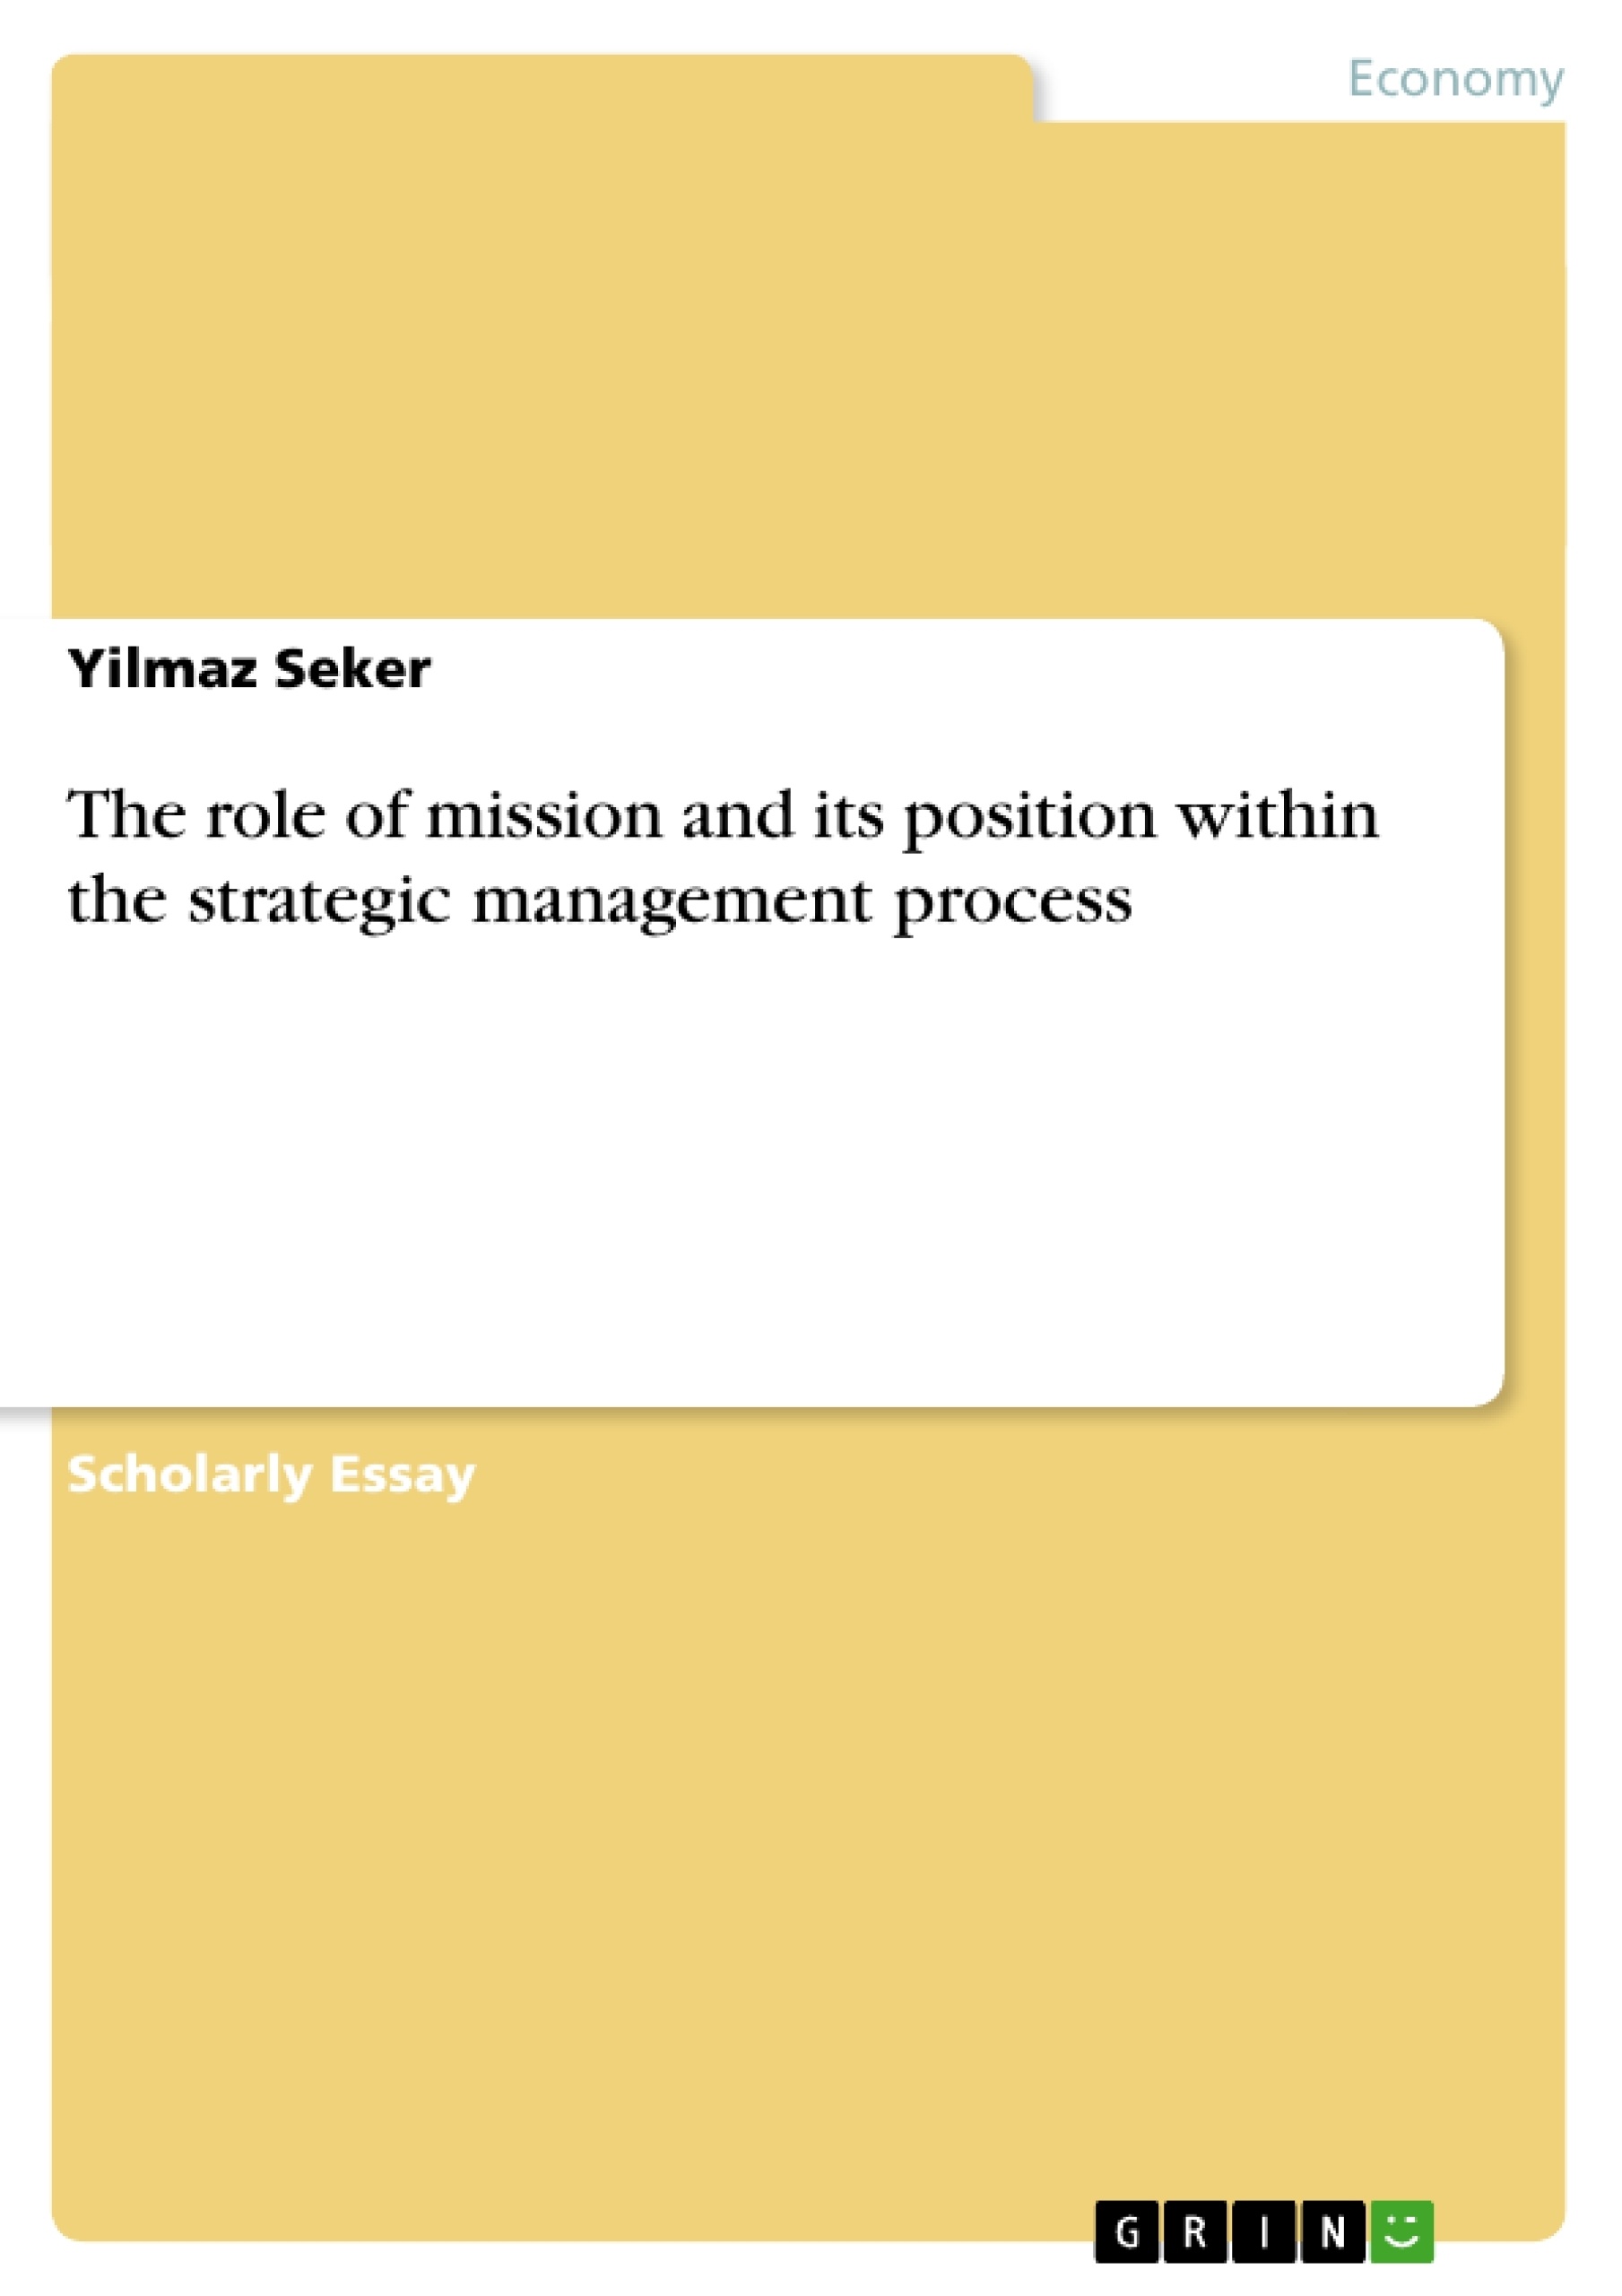 Title: The role of mission and its position within the strategic management process